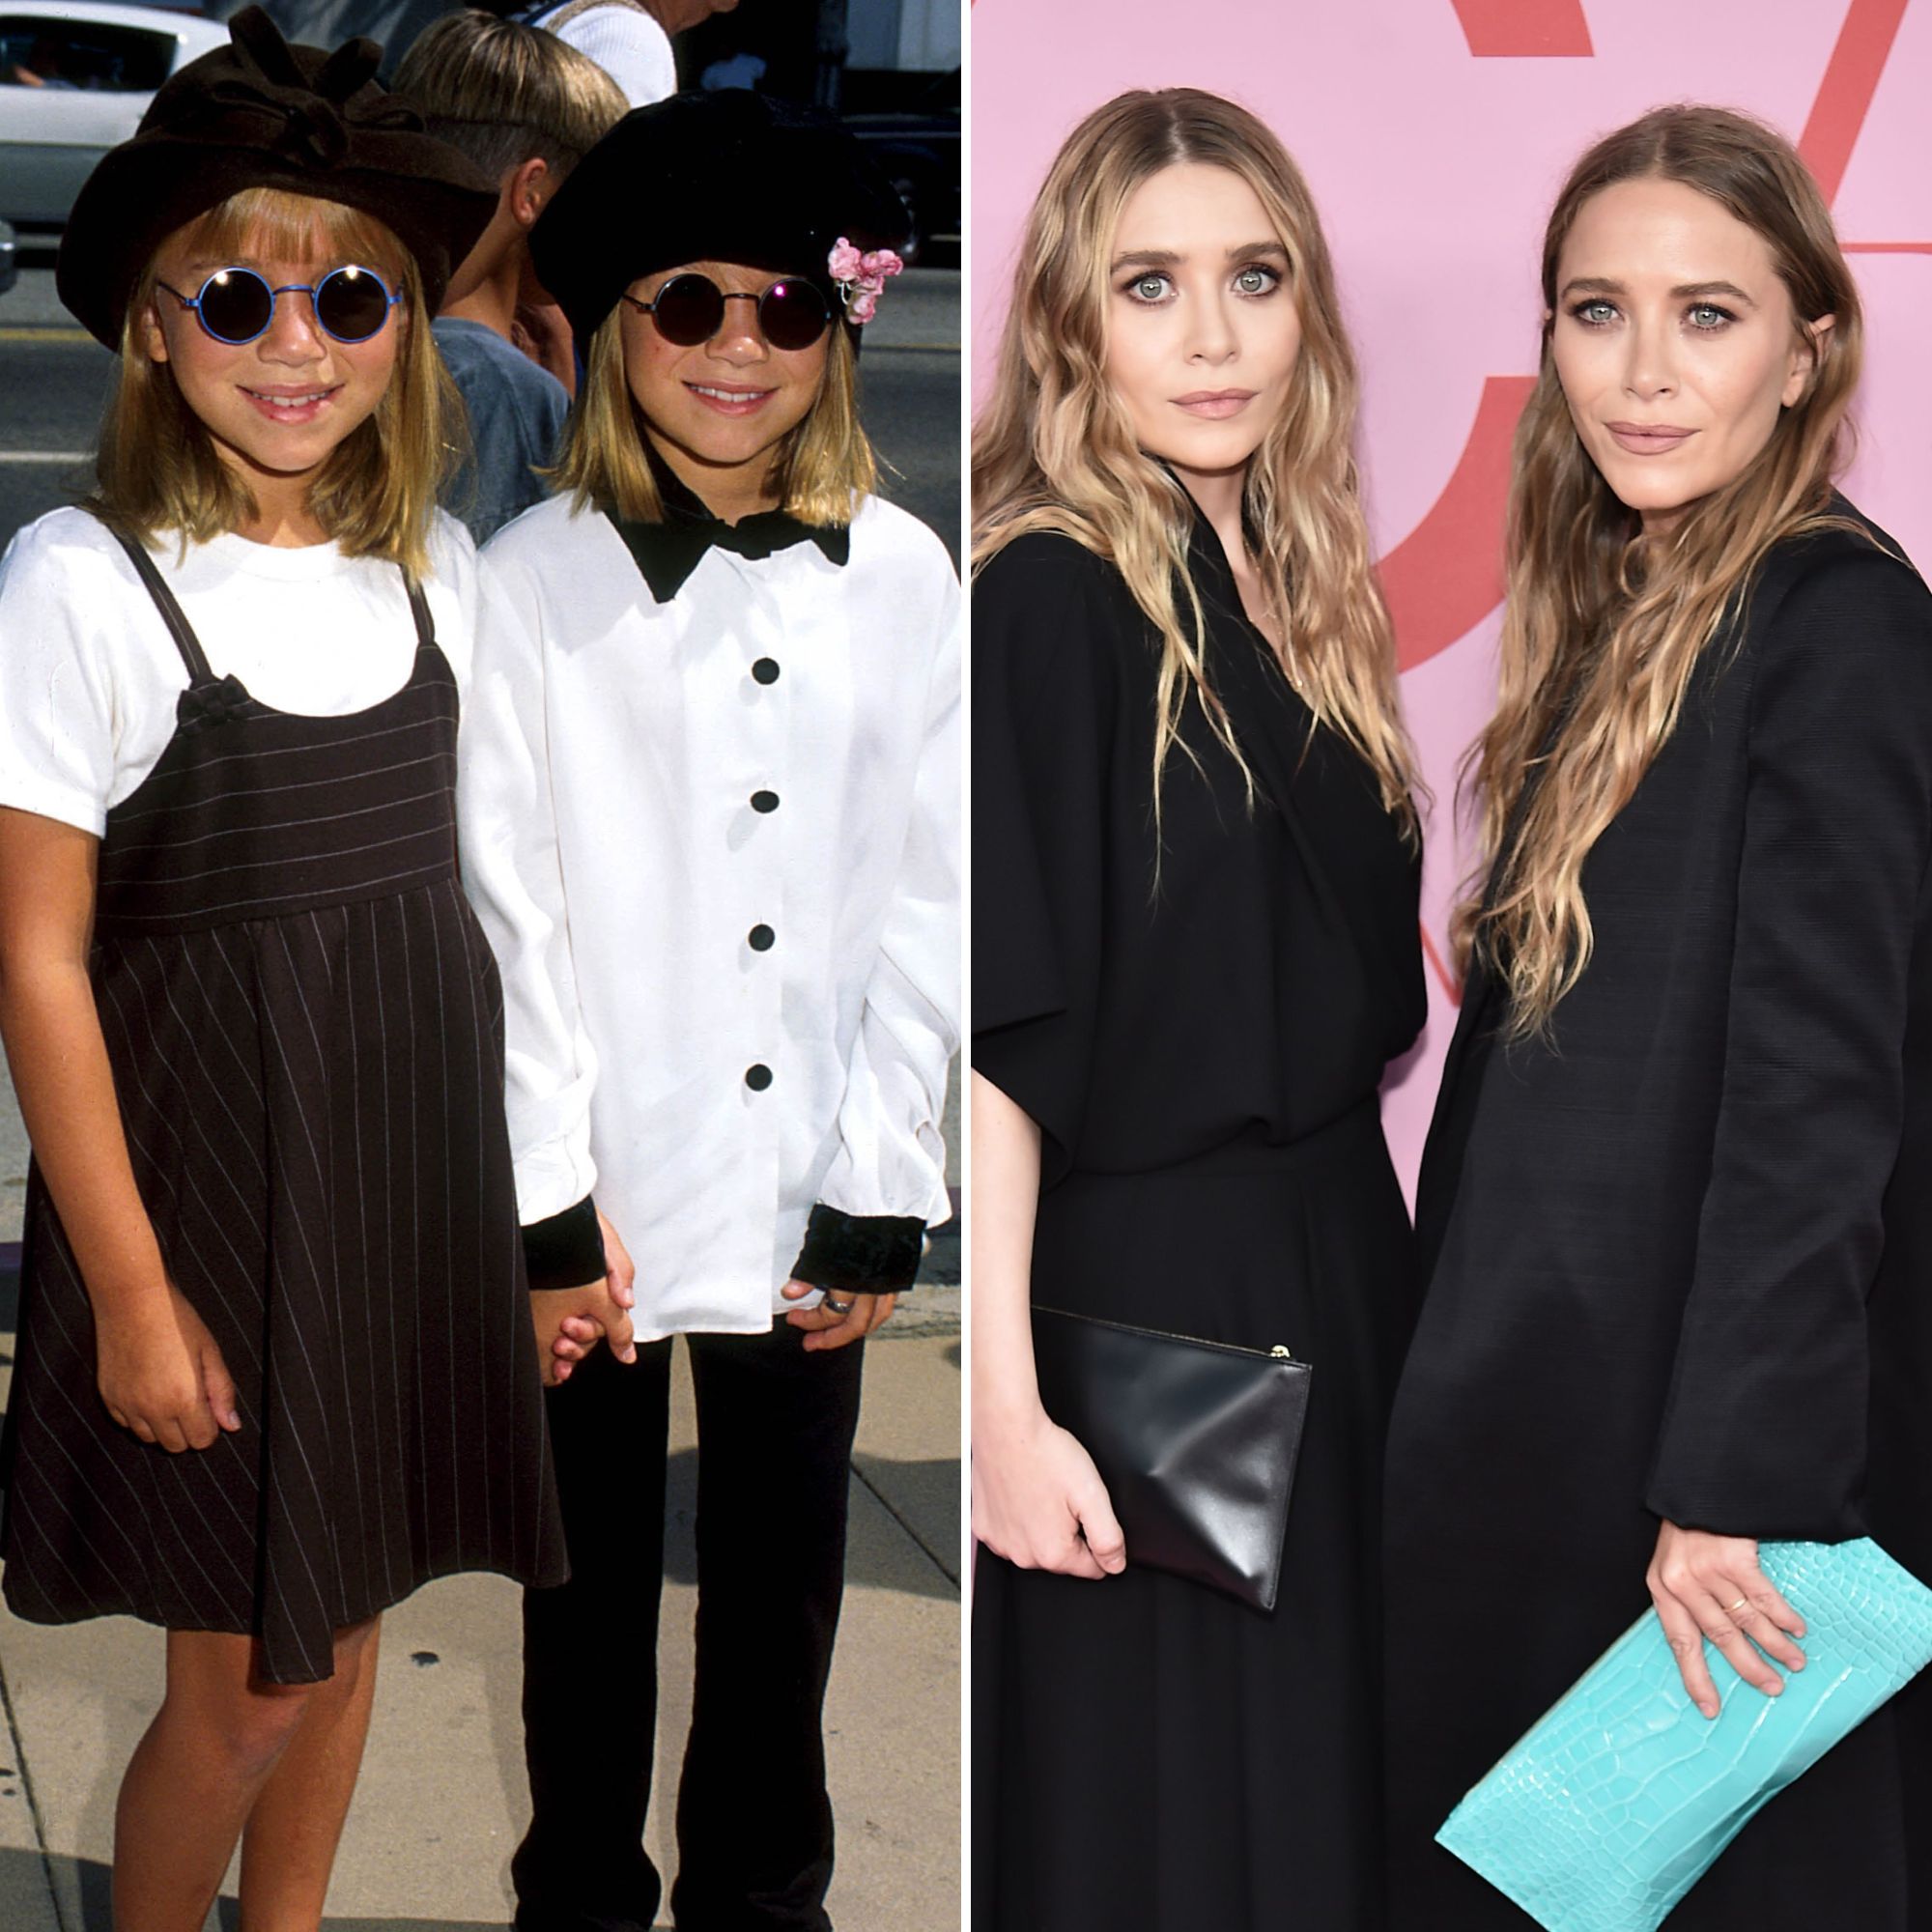 mary kate and ashley olsen then and now